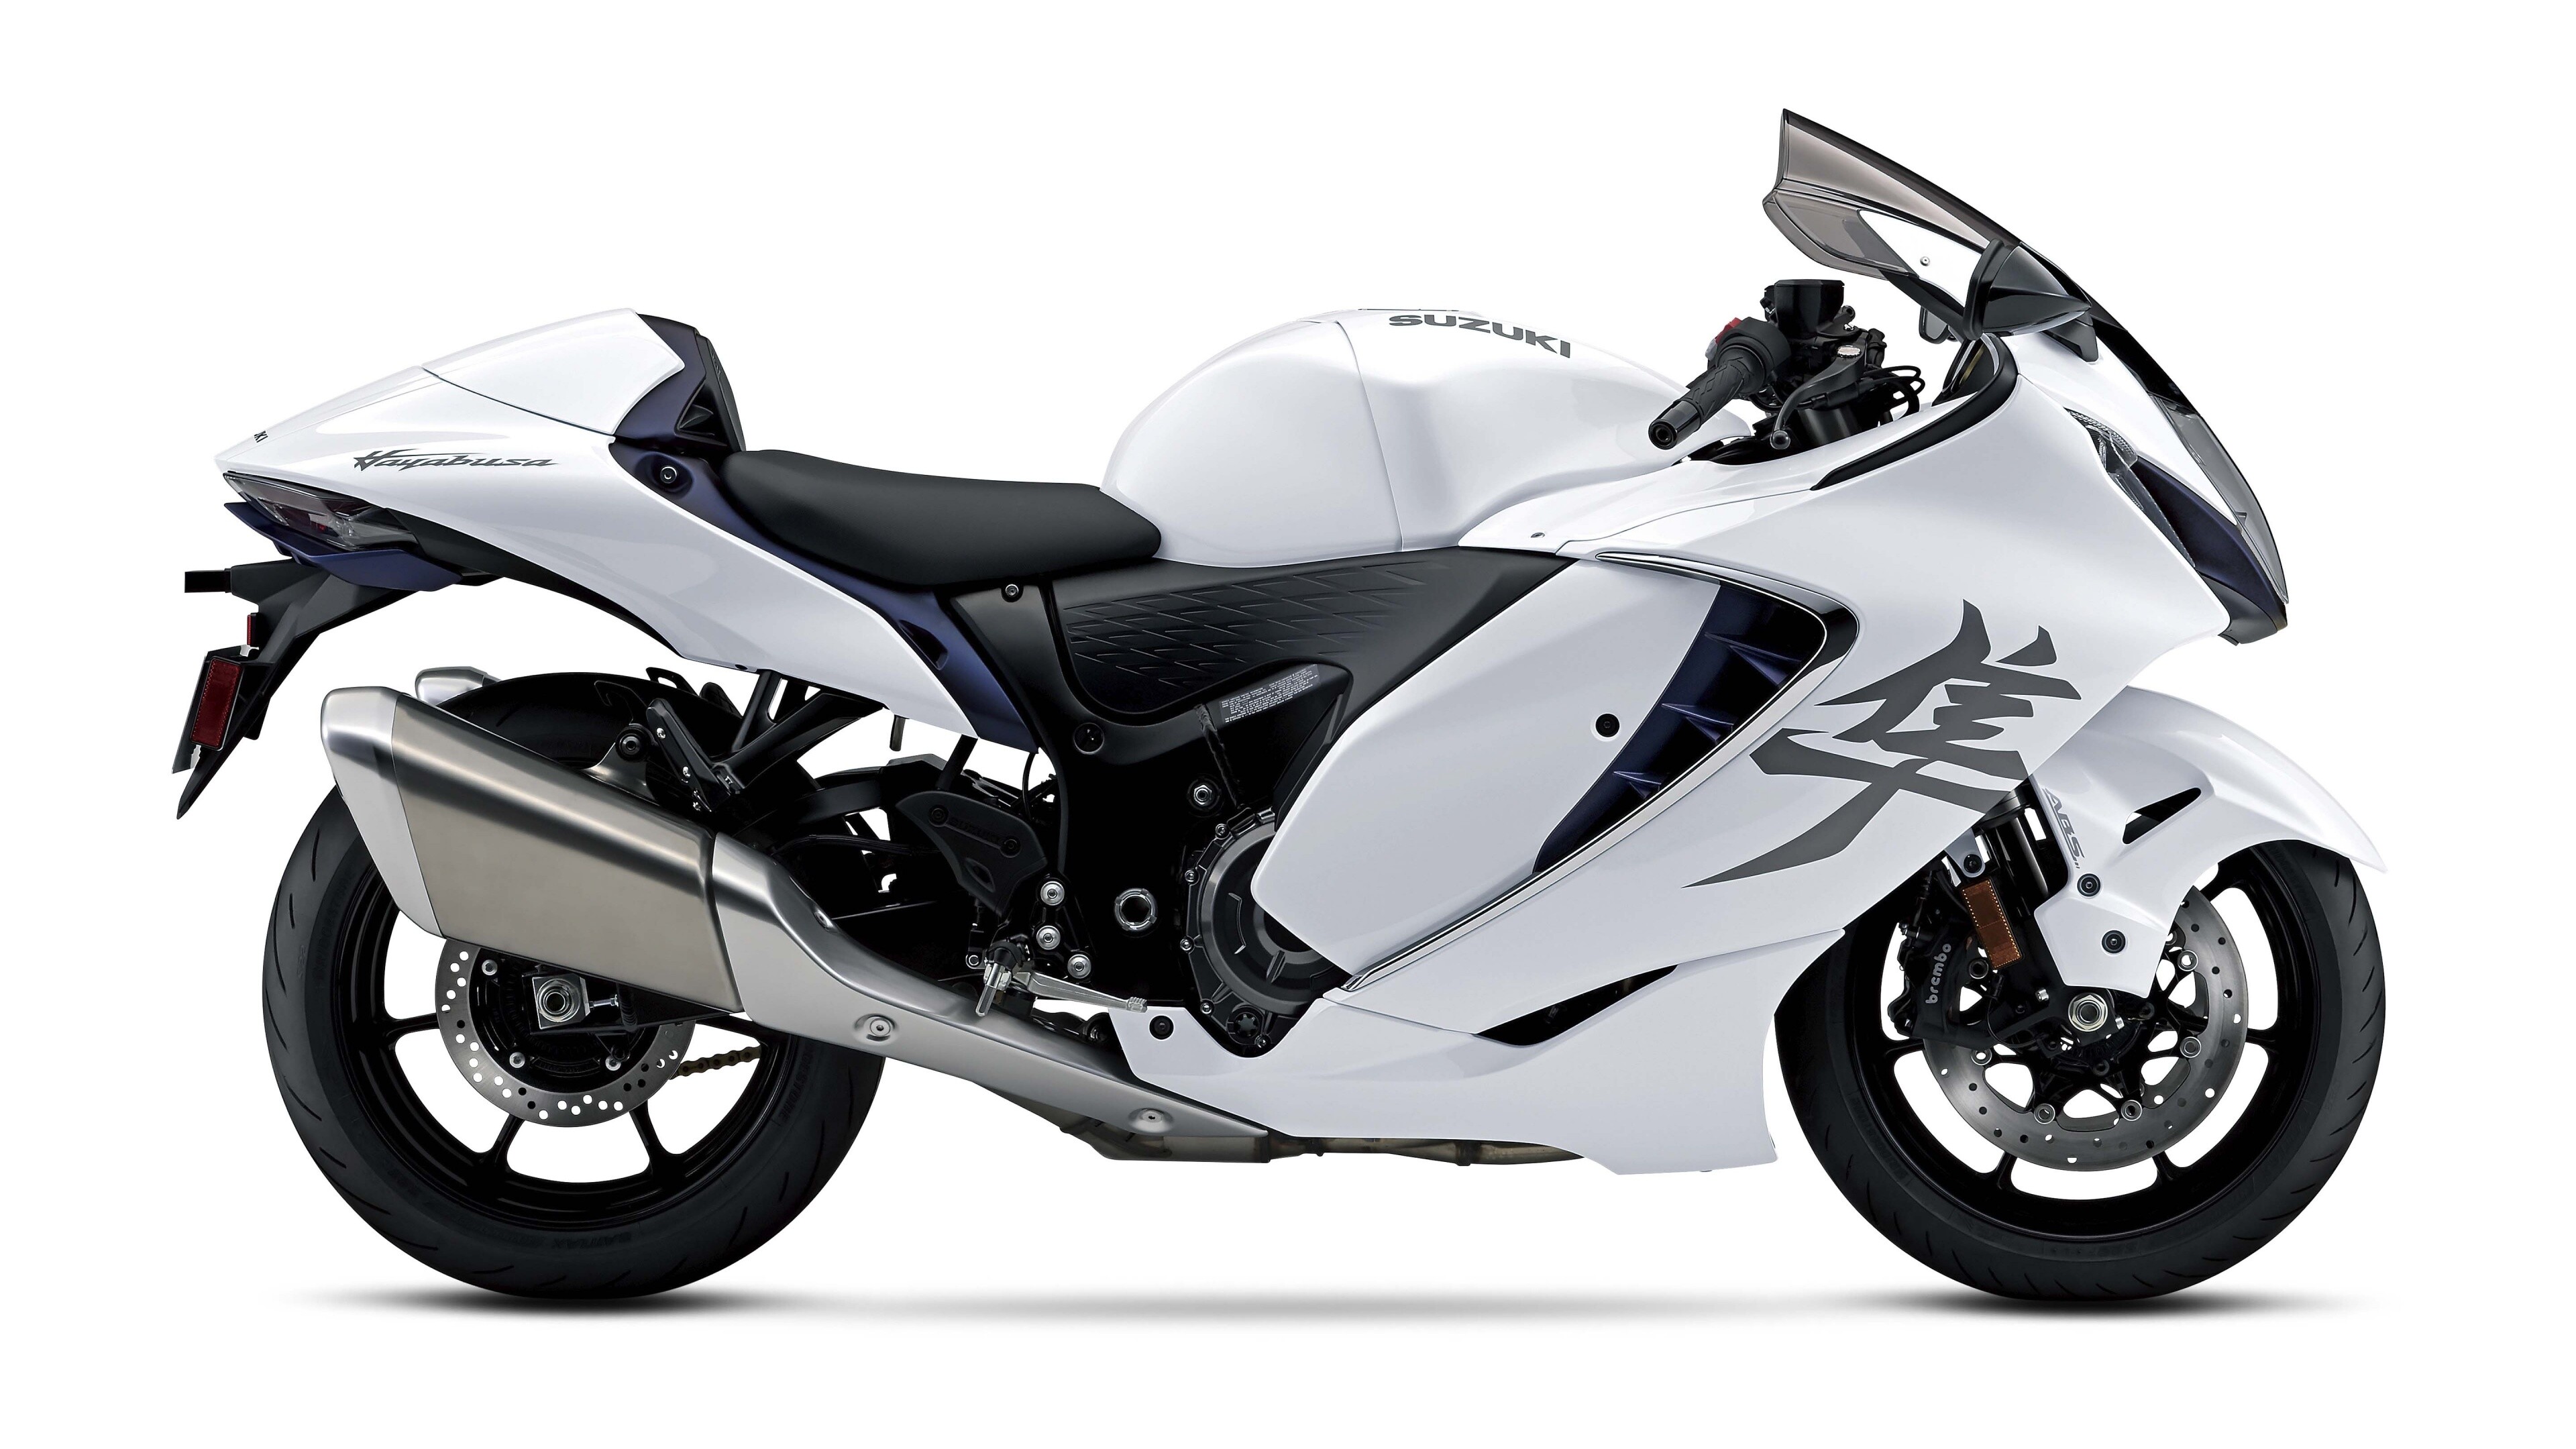 Suzuki Hayabusa: GSX1300R, Recognized as the world’s fastest production motorcycle. 3840x2160 4K Background.